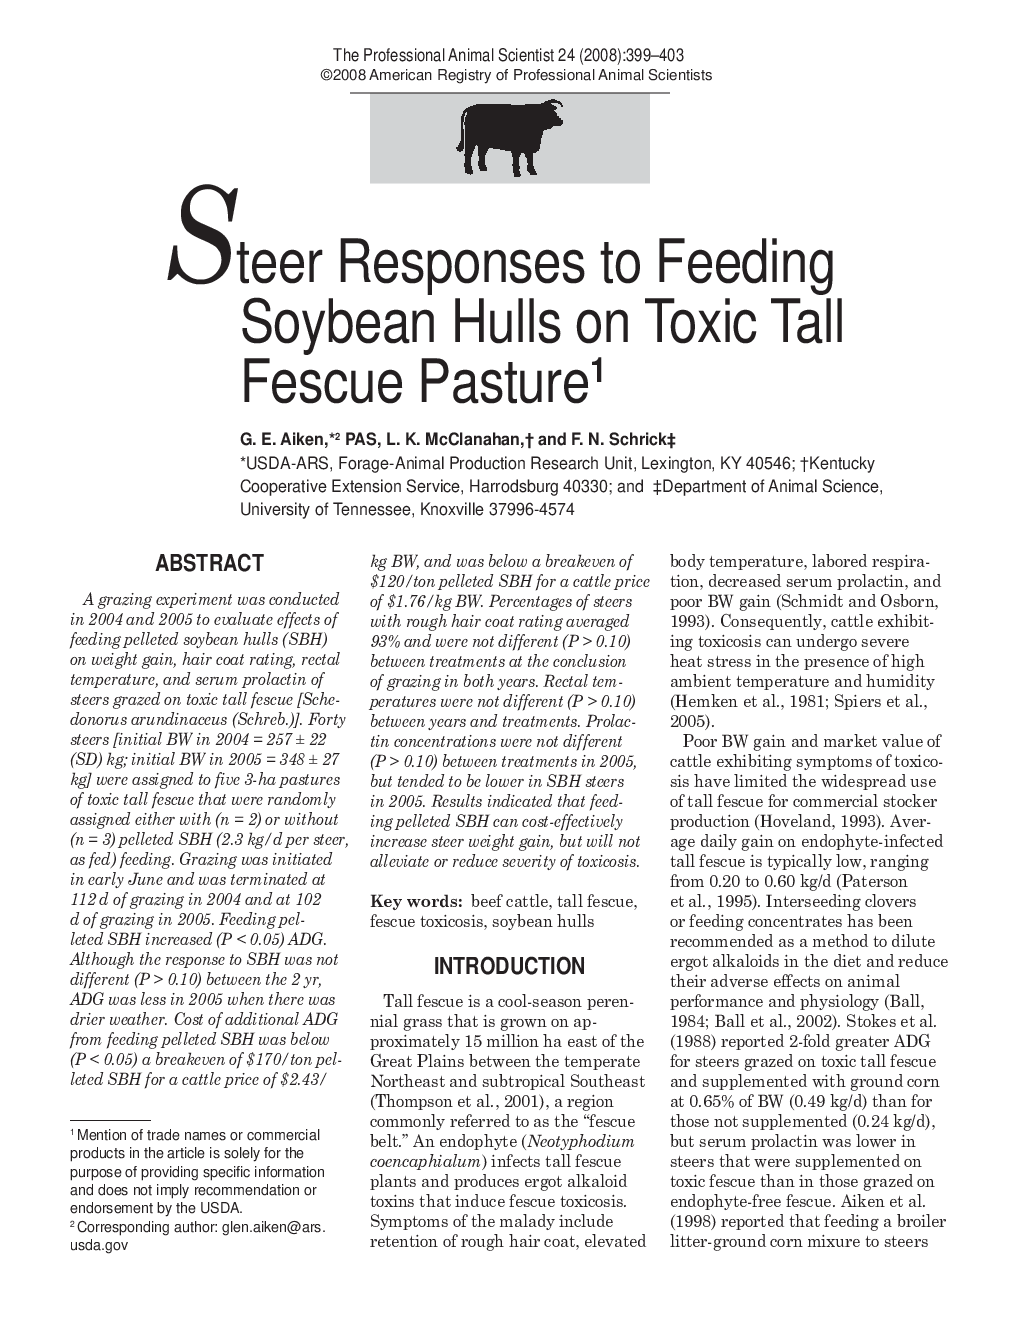 Steer Responses to Feeding Soybean Hulls on Toxic Tall Fescue Pasture1